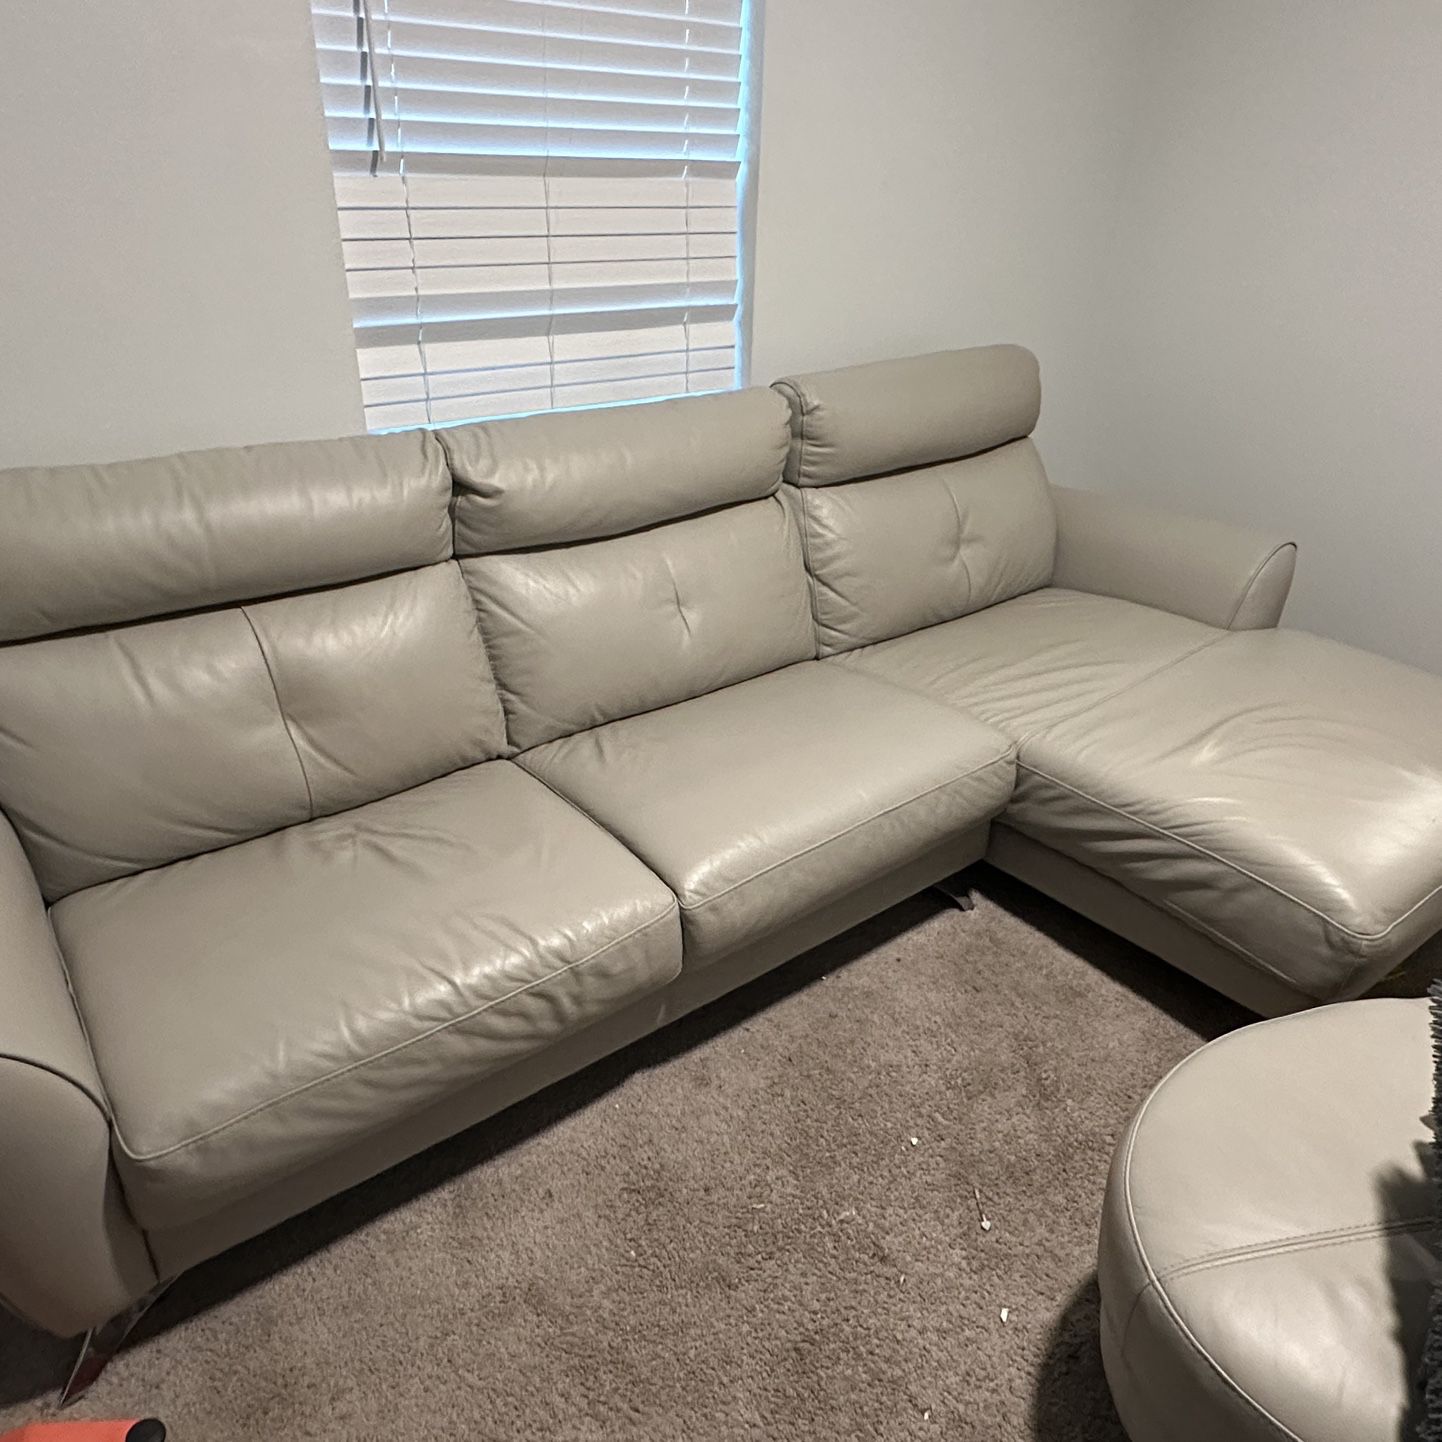 🛋️ For Sale: White Leather Couch Set with Matching Chair and Ottoman 🛋️